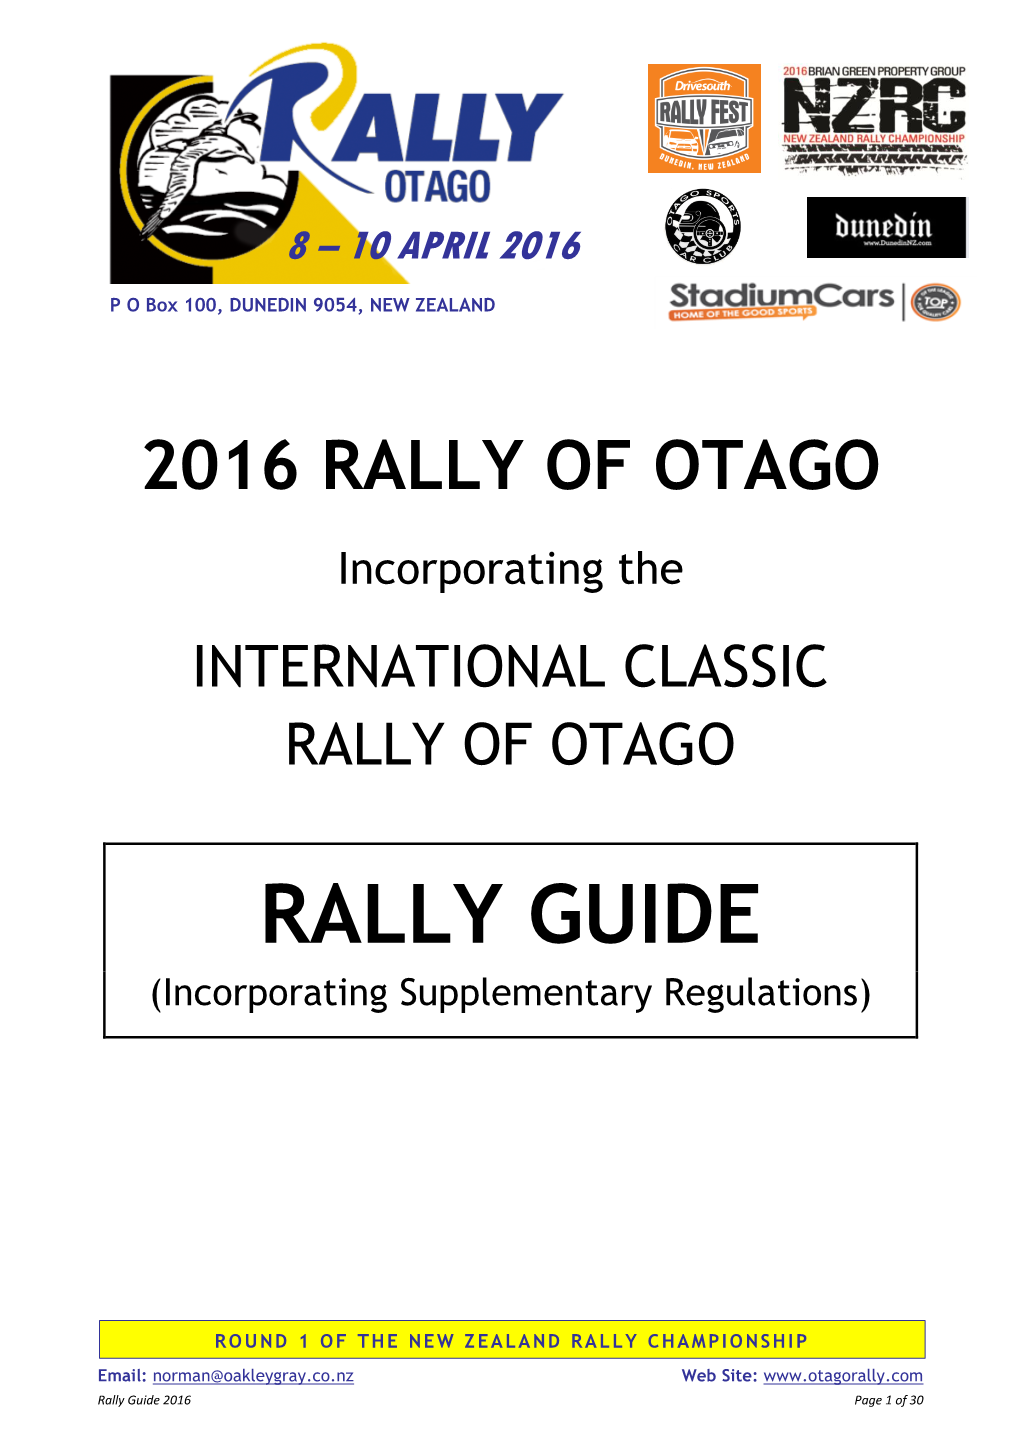 RALLY GUIDE (Incorporating Supplementary Regulations)